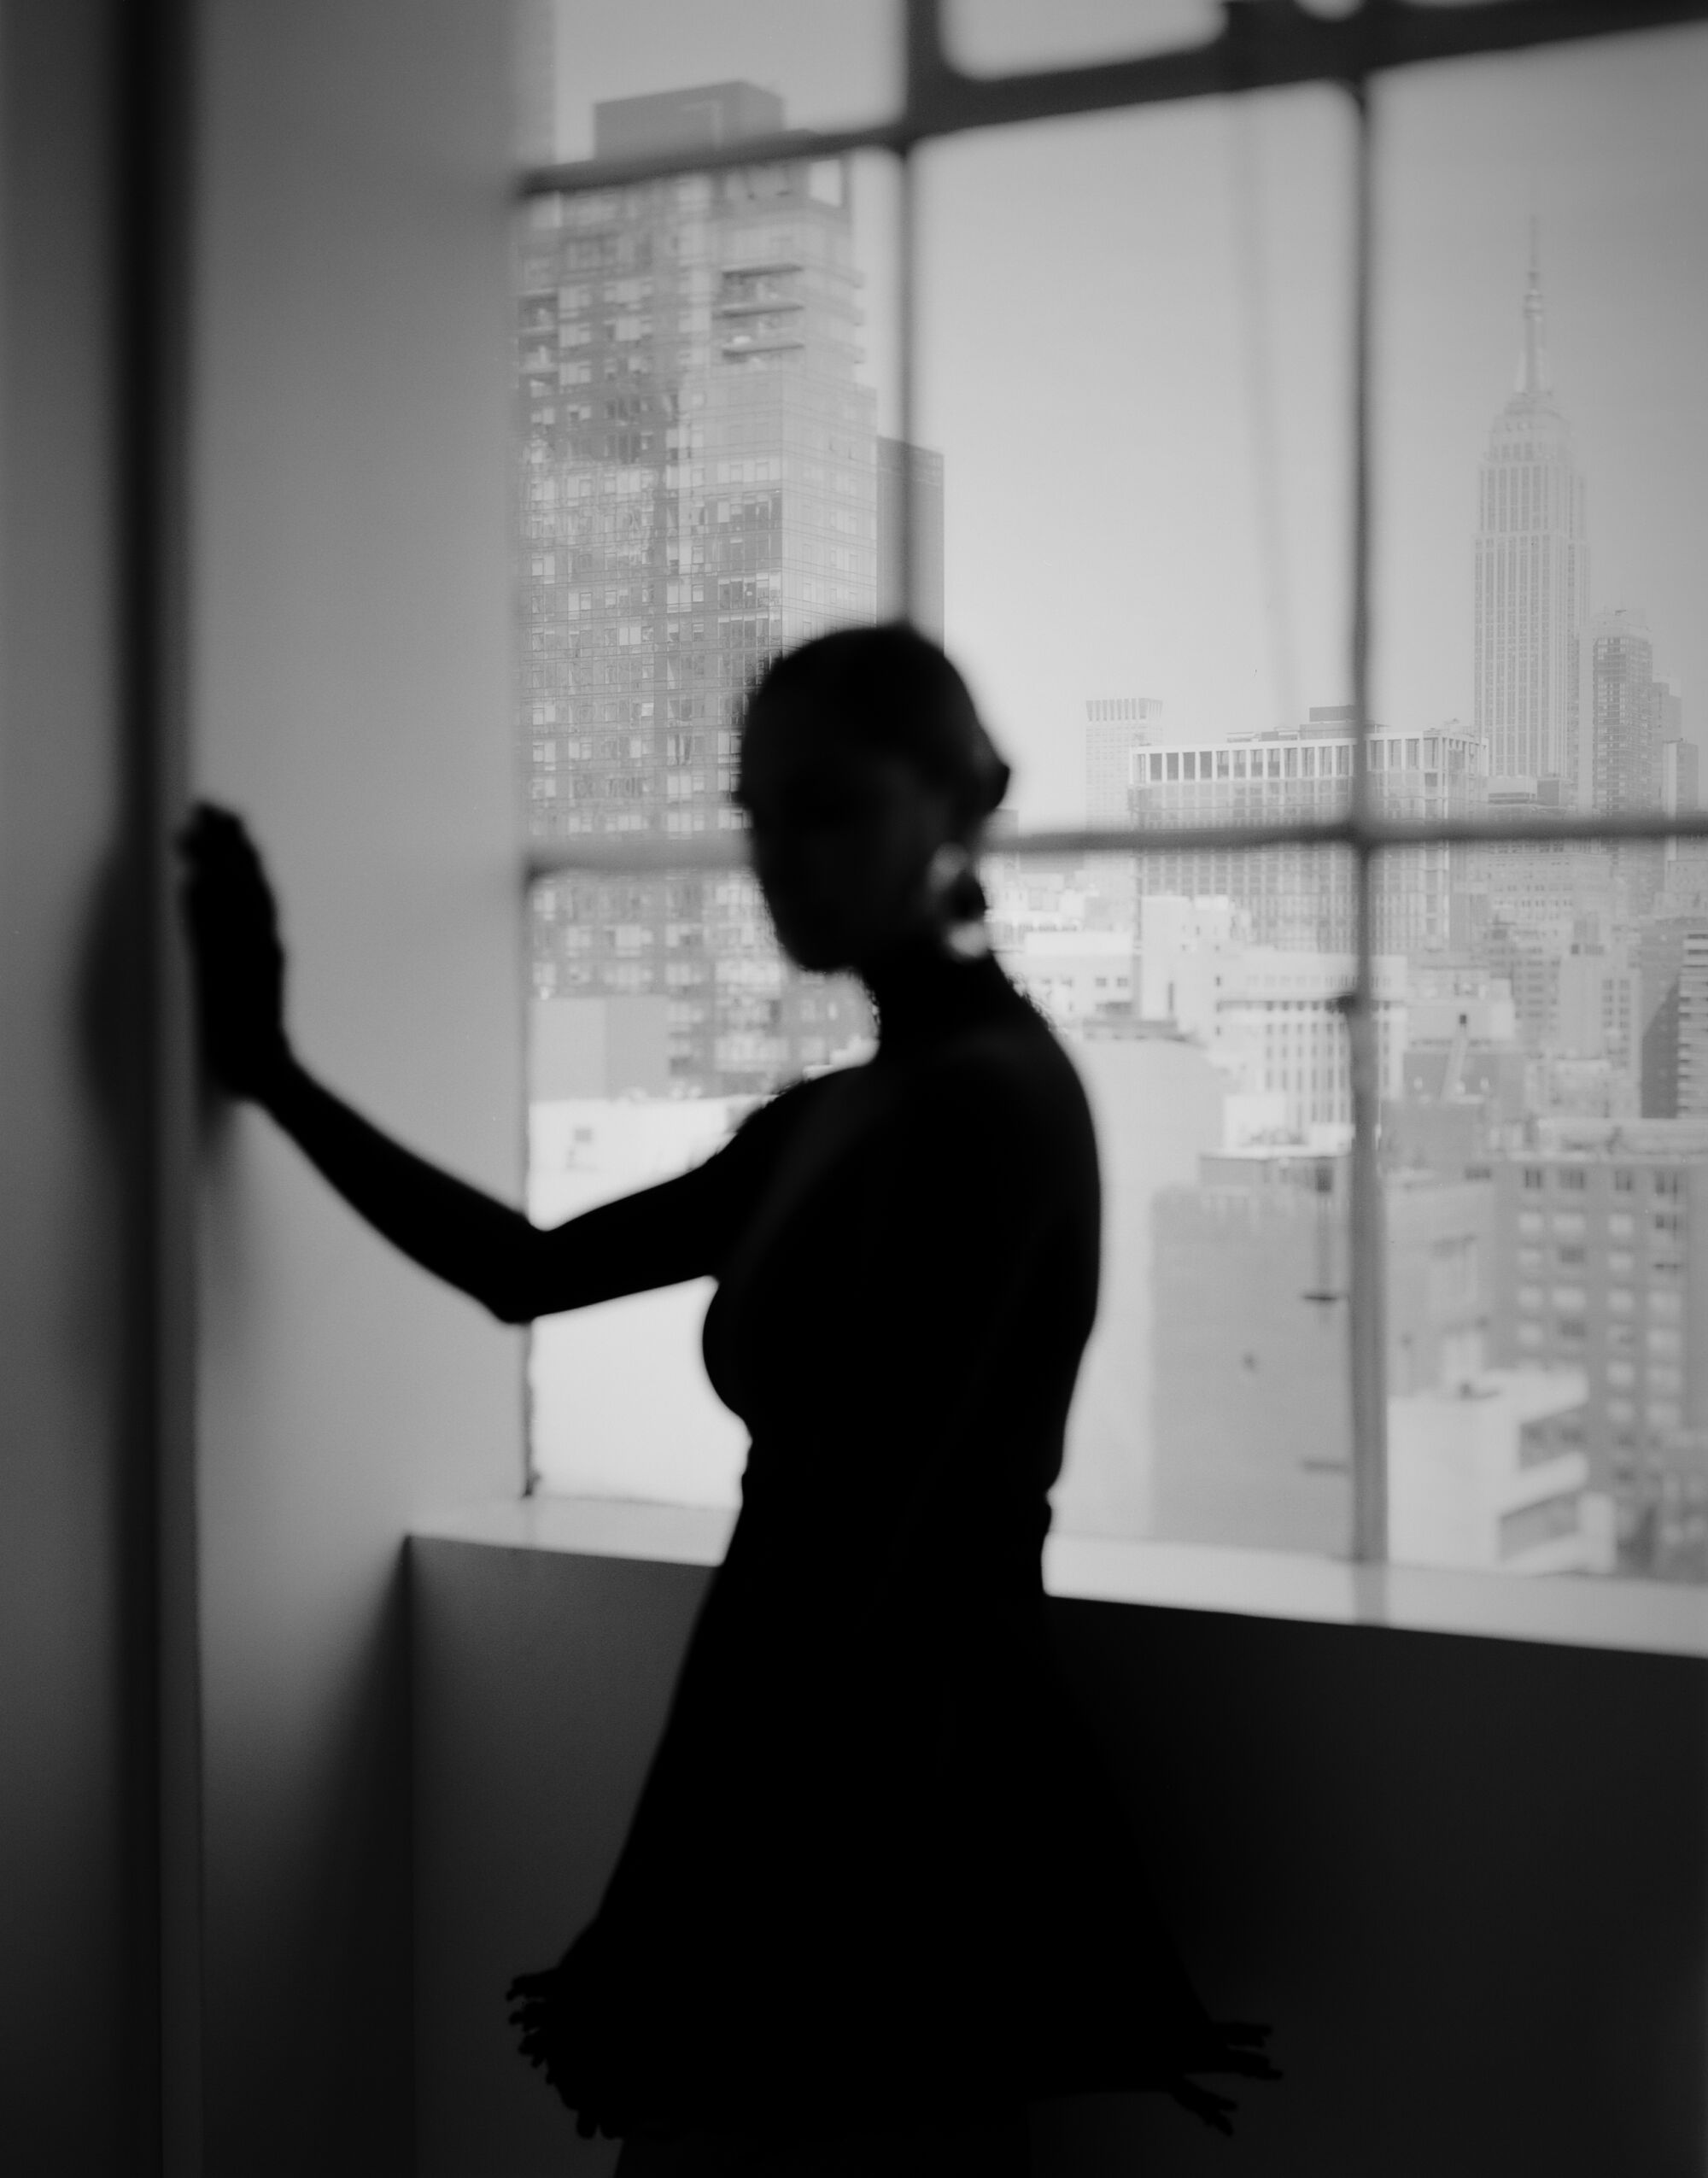 Misty Copeland is silhouetted against a window.